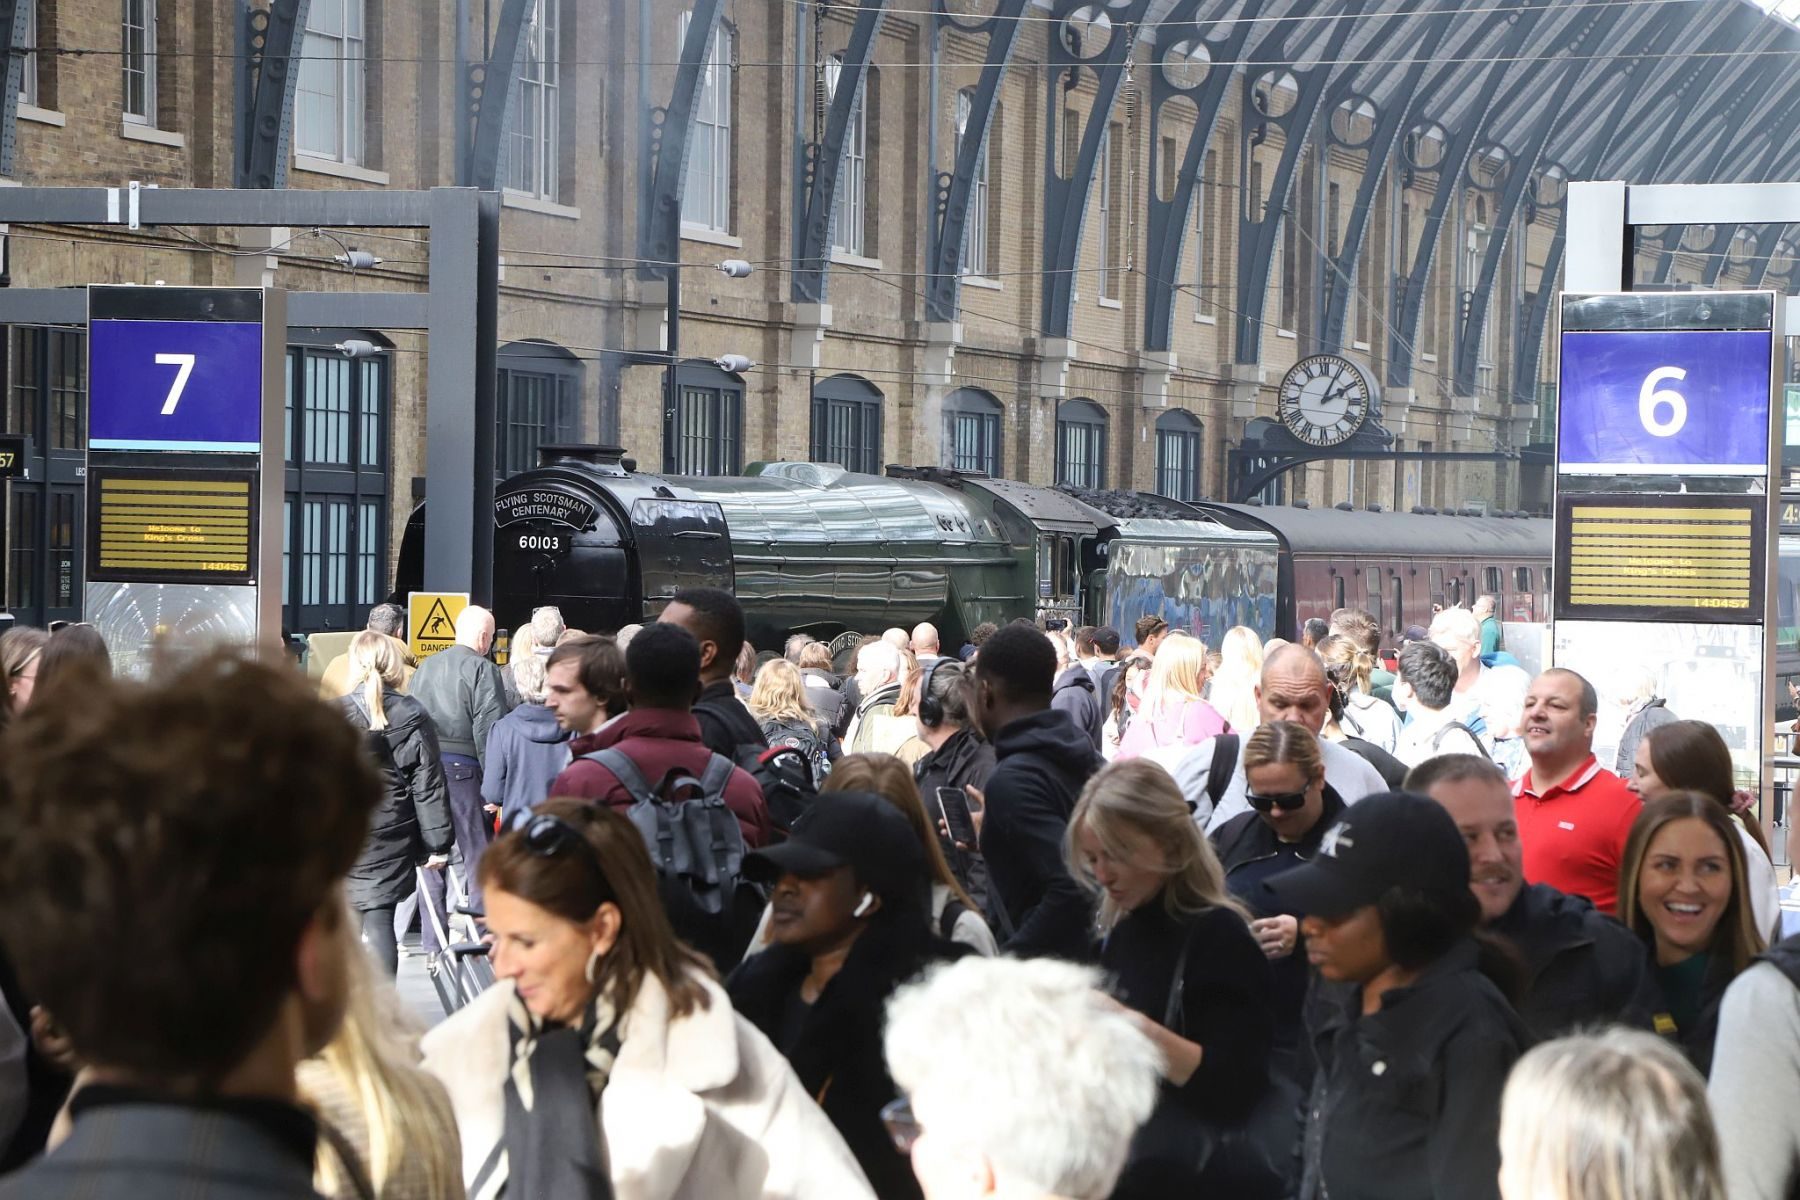 Crowds of passengers pass Flying Scotsman at King's Cross. Flying Scotsman steam locomotive at King's Cross railway station platform 8 for the 170th anniversary of the station's opening and the start of Flying Scotsman's 100th birthday celebrations